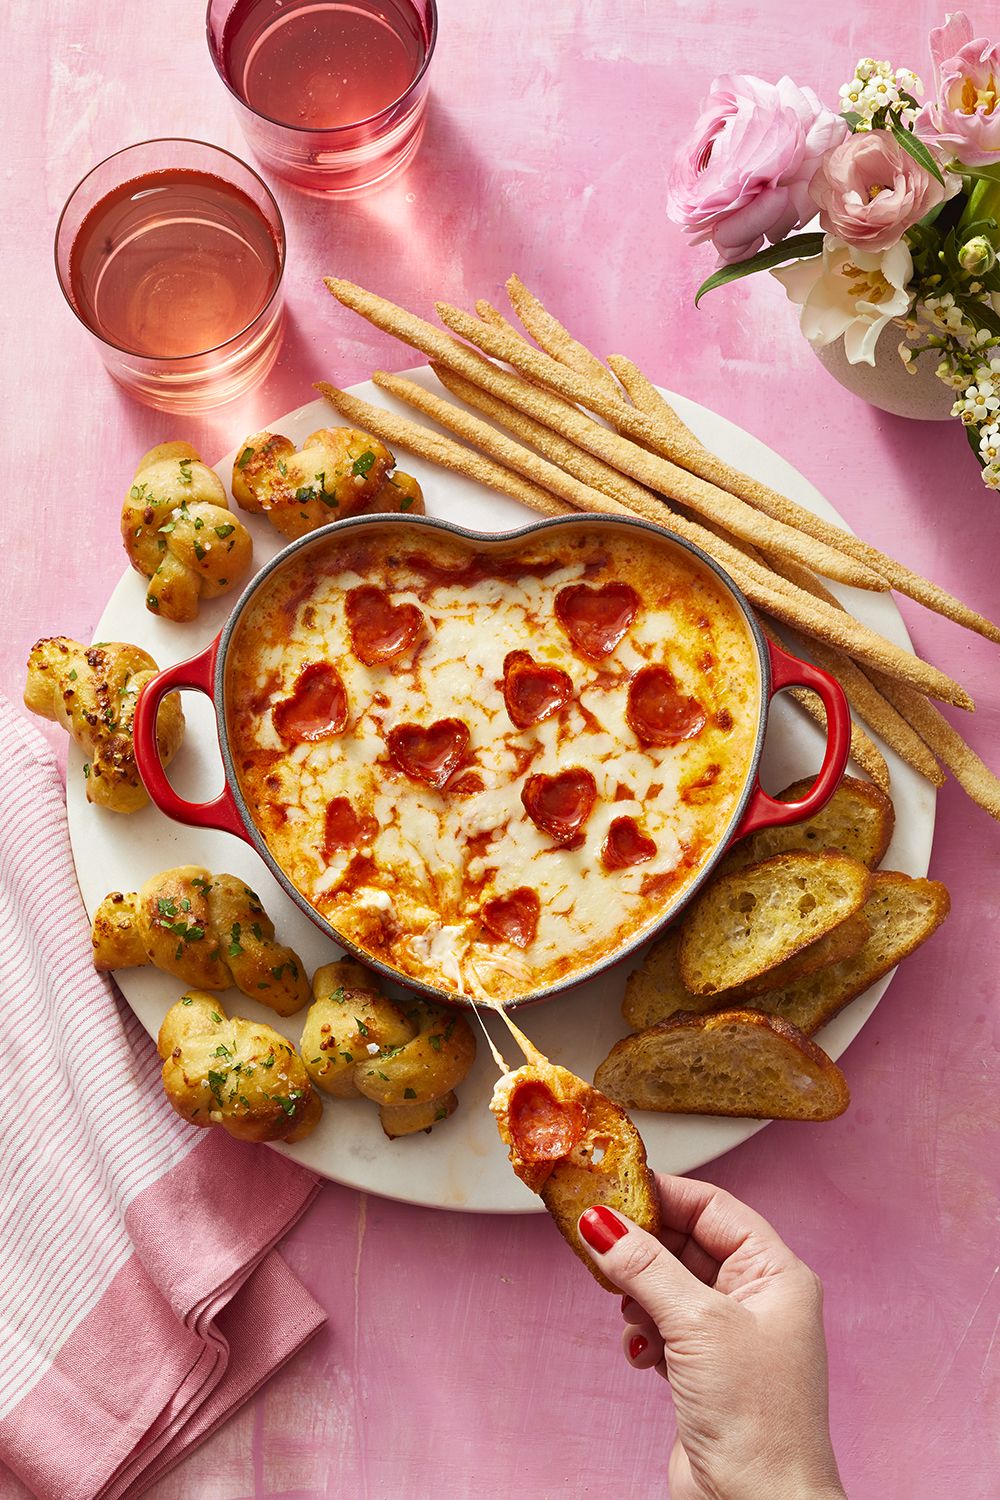 51 Best Valentines Day Recipes — Food Ideas for Valentines image